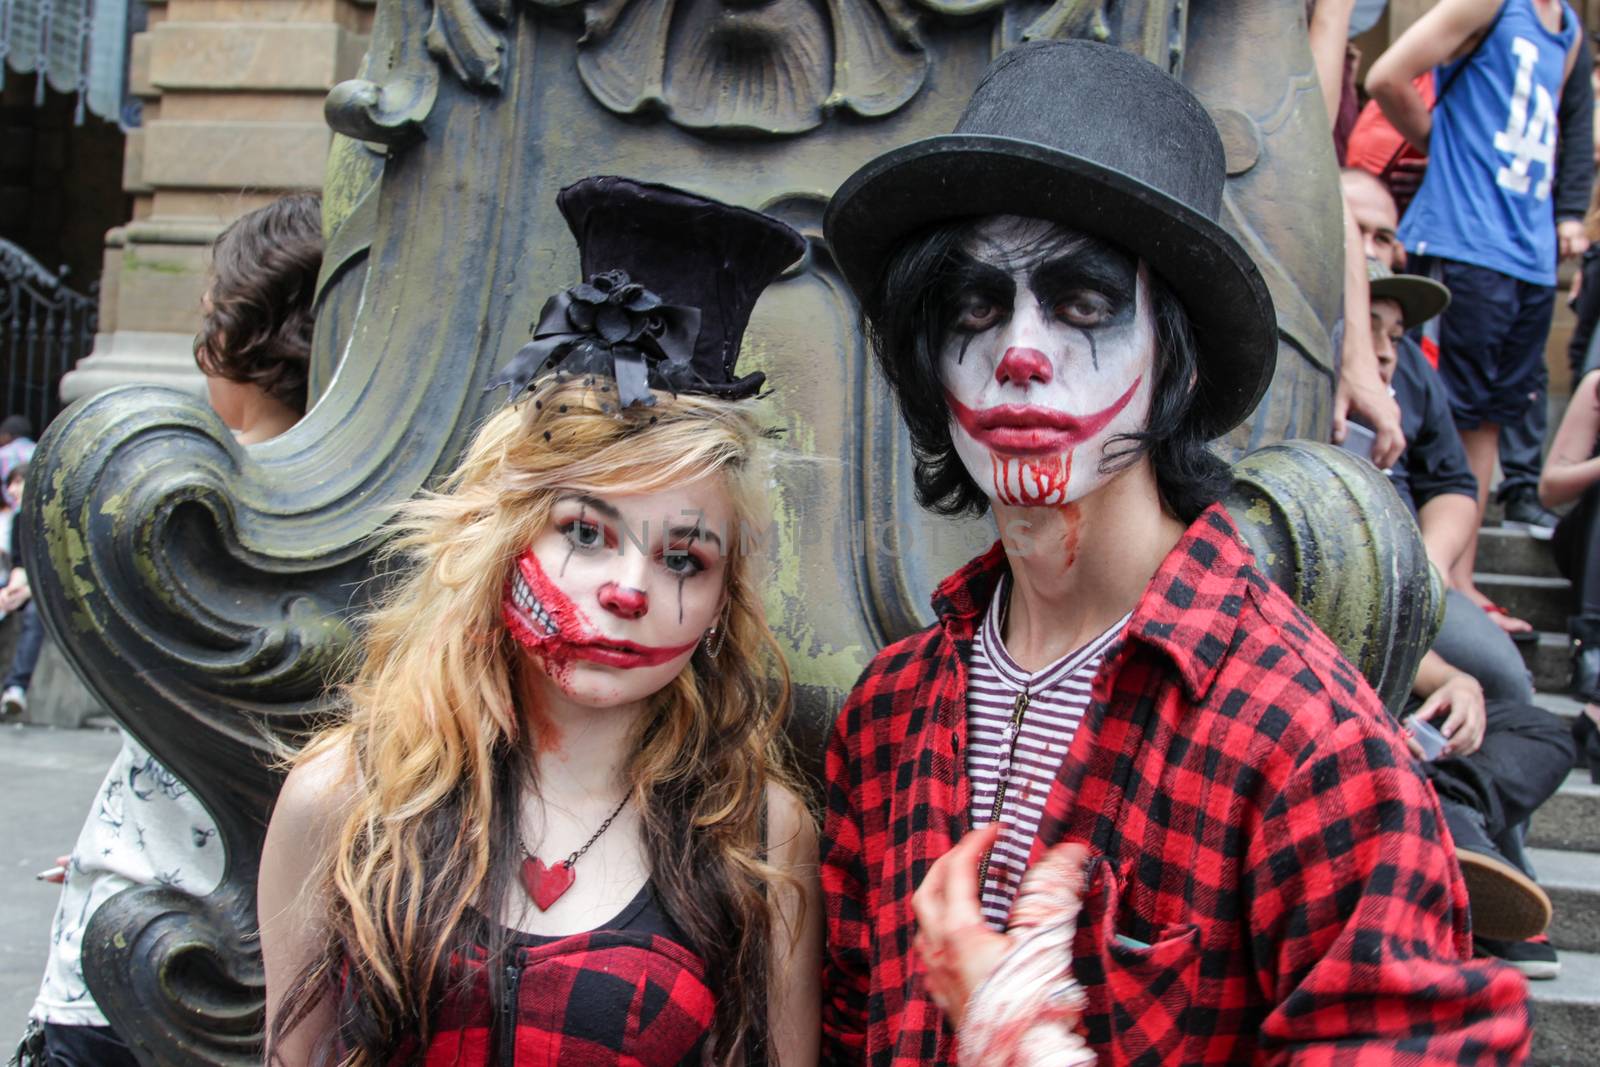 Sao Paulo, Brazil November 11 2015: An unidentified couple with costumes in the annual event Zombie Walk in Sao Paulo Brazil.